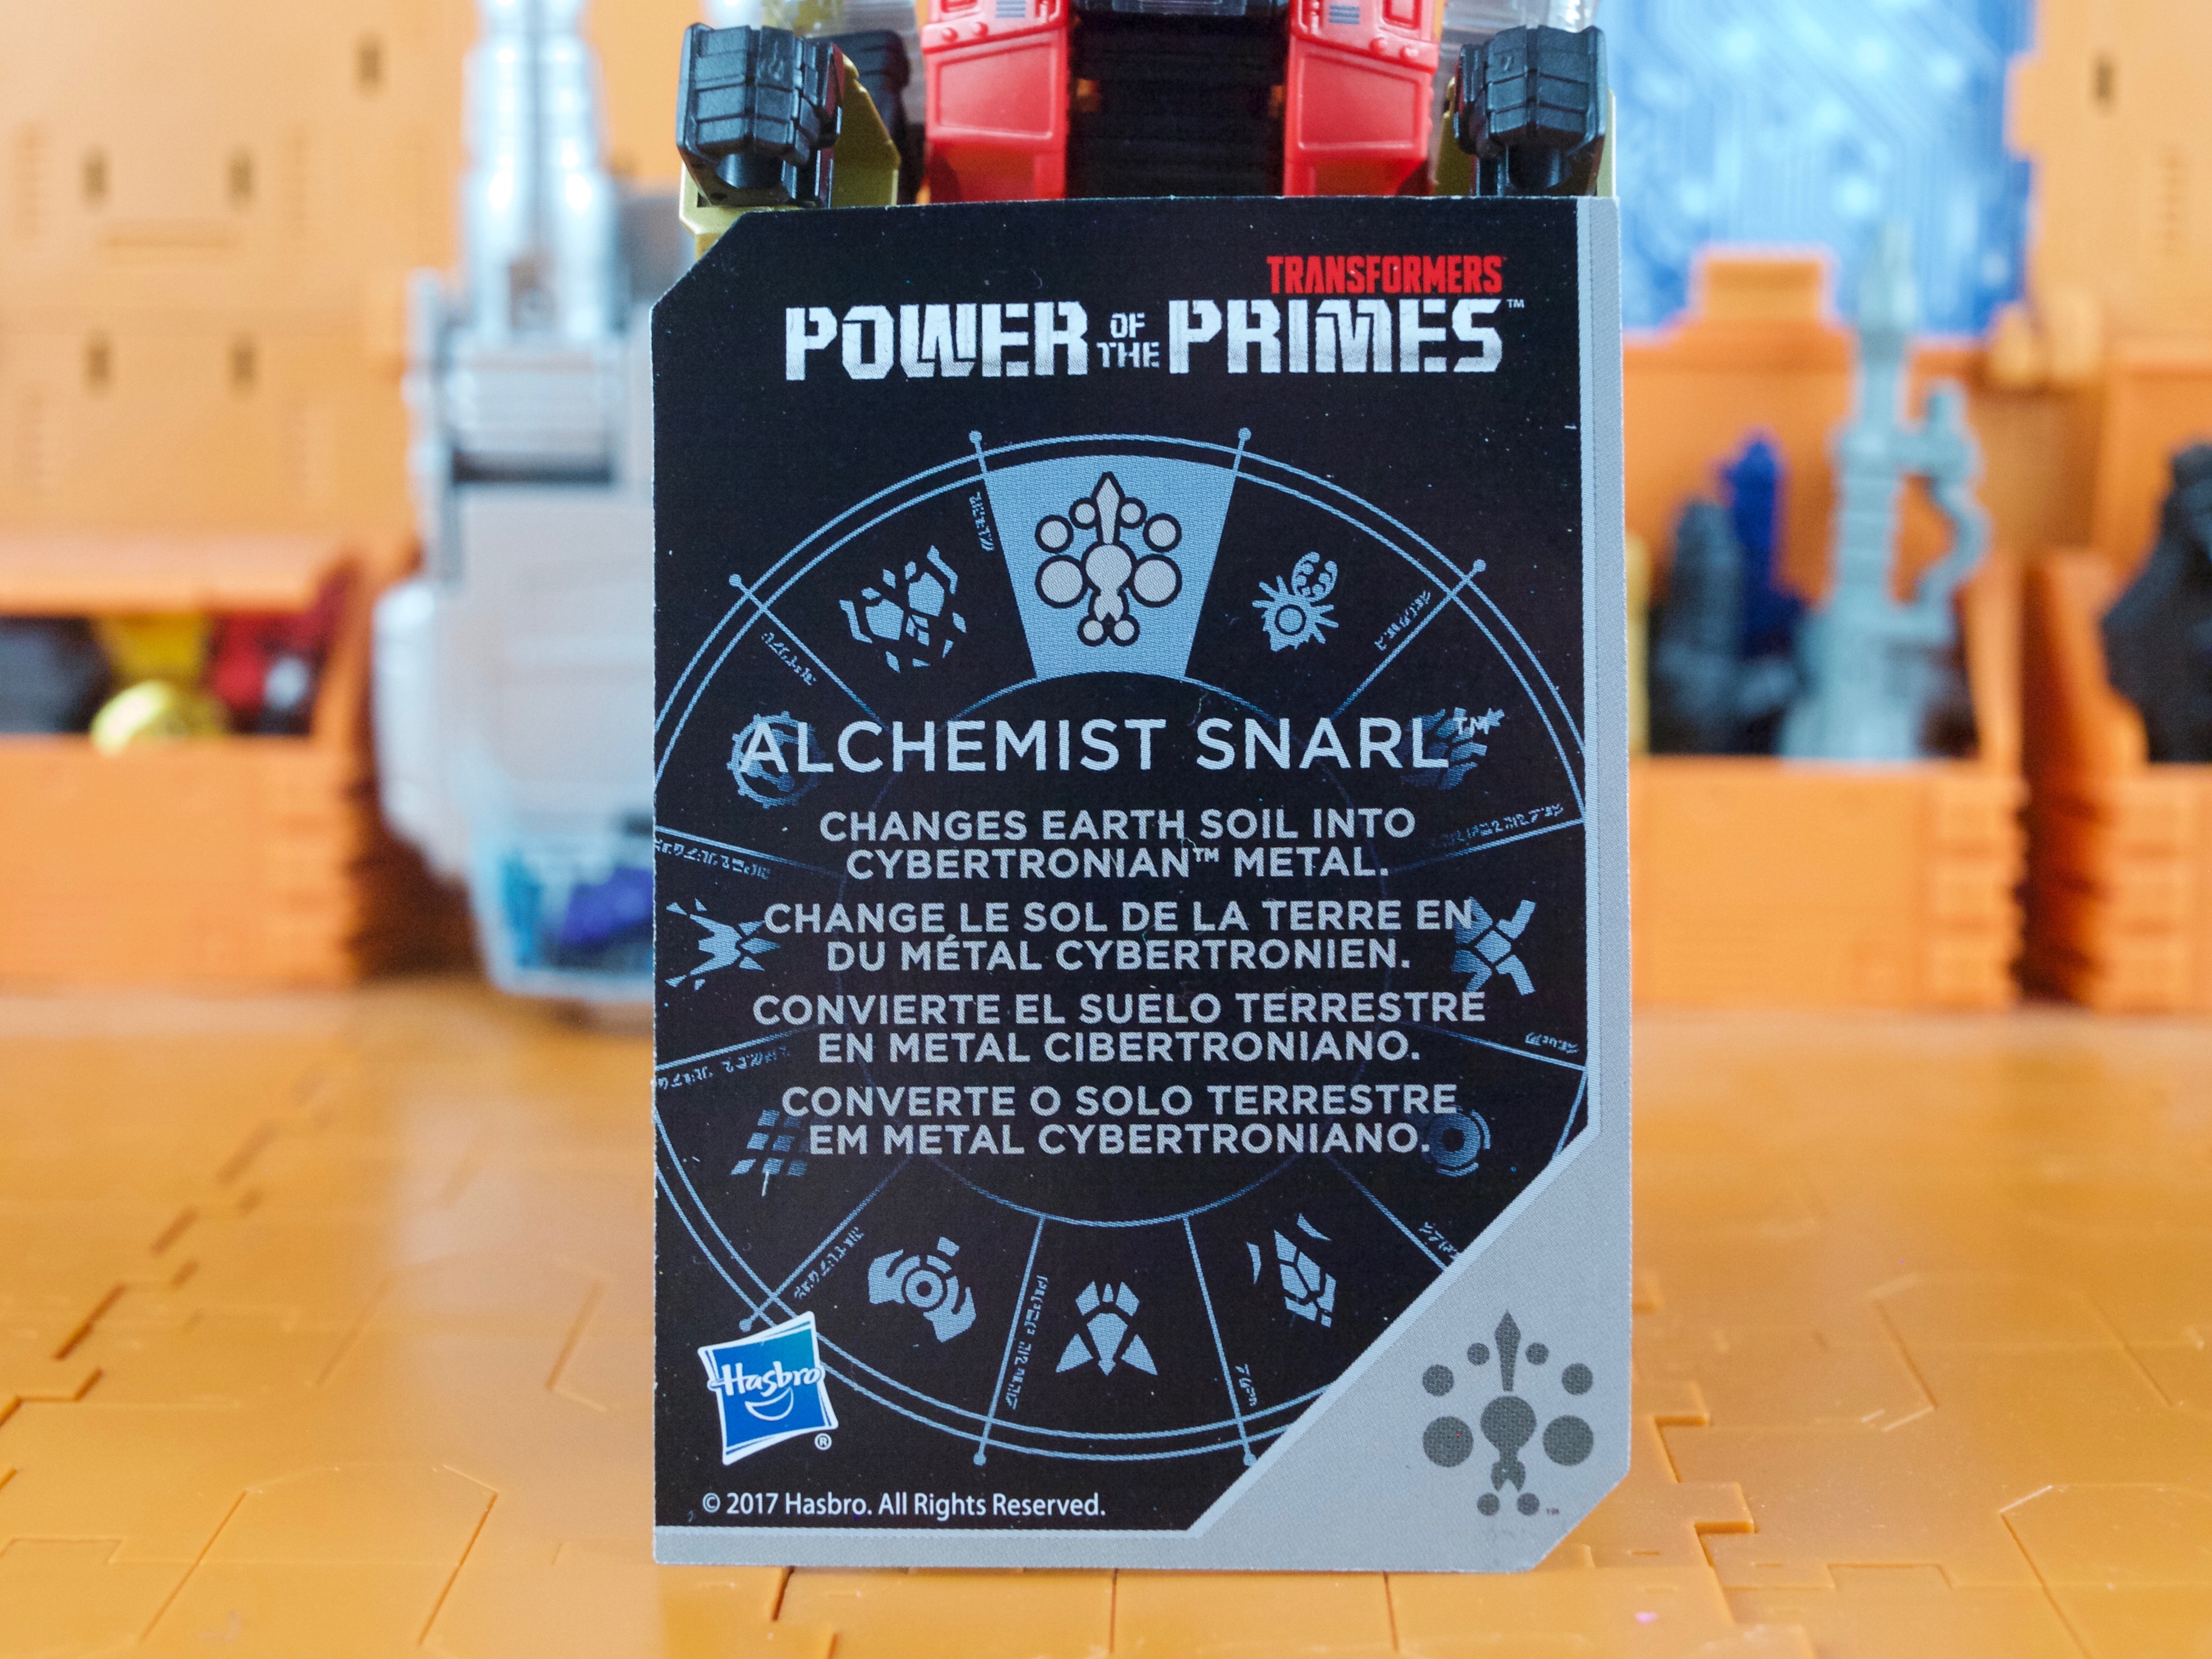 Alchemist Snarl: Changes Earth soil into Cybertronian metal